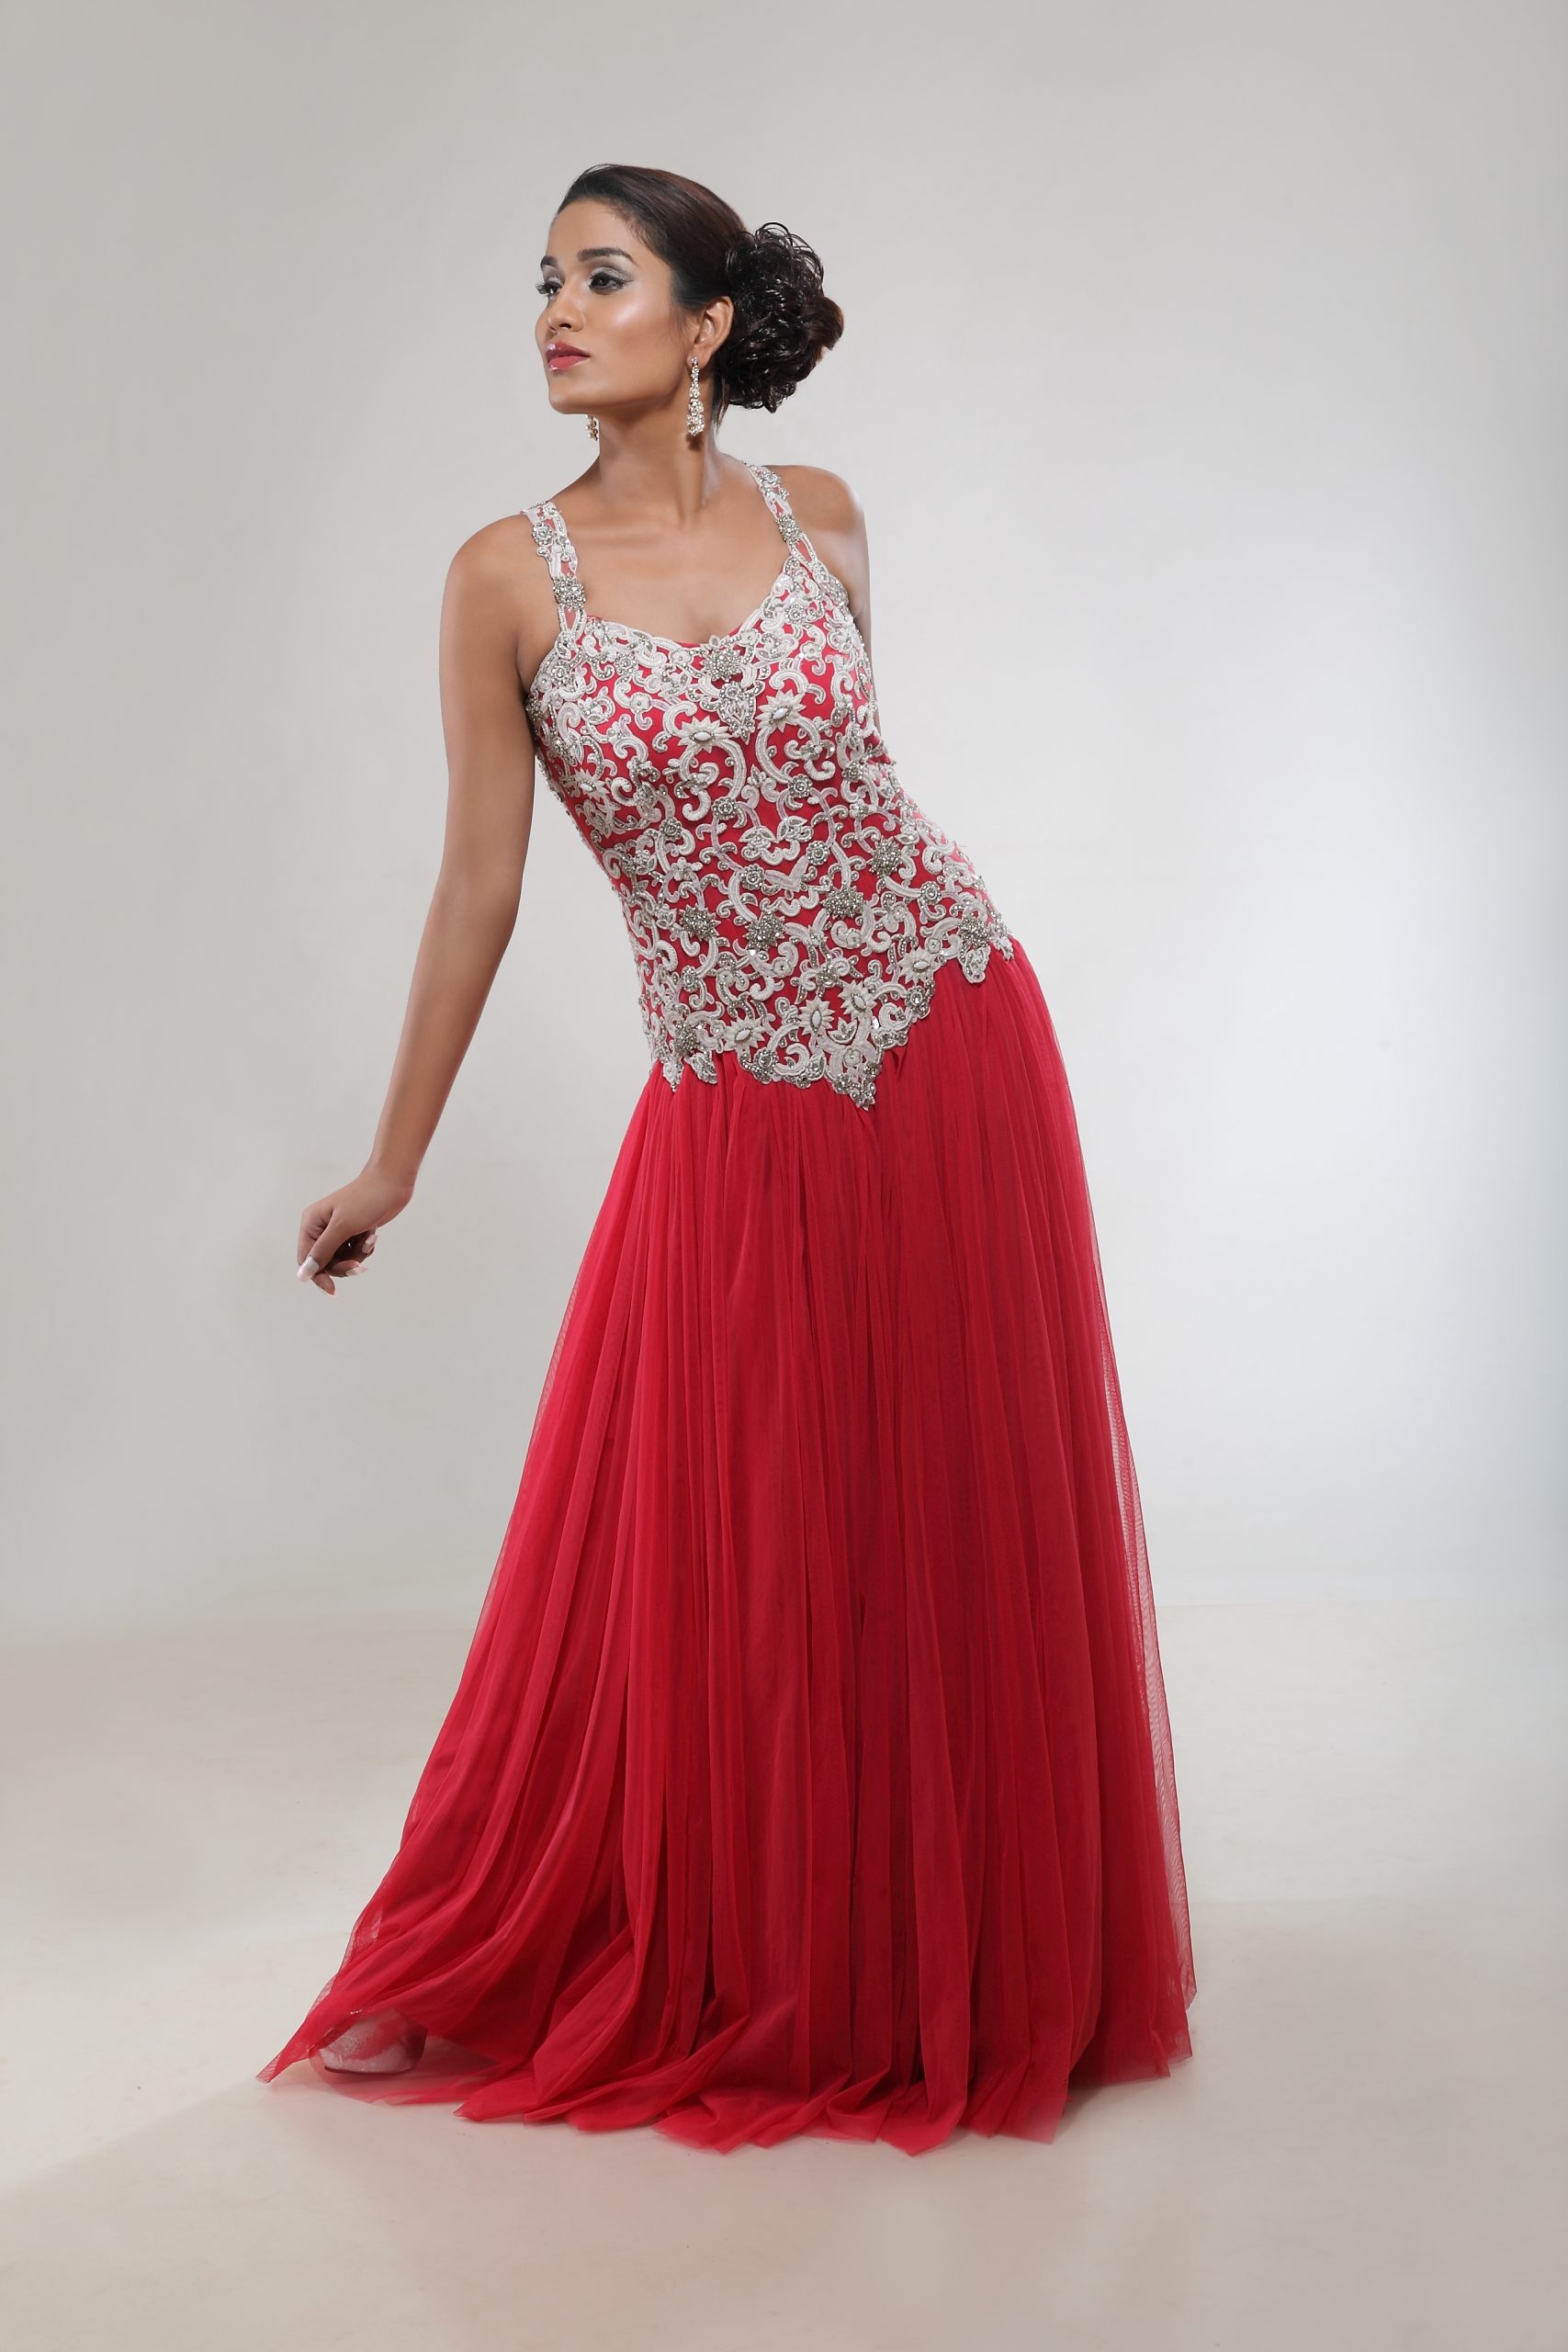 Popular Indian Gowns for sale: Gown for women online | Indian Gowns online